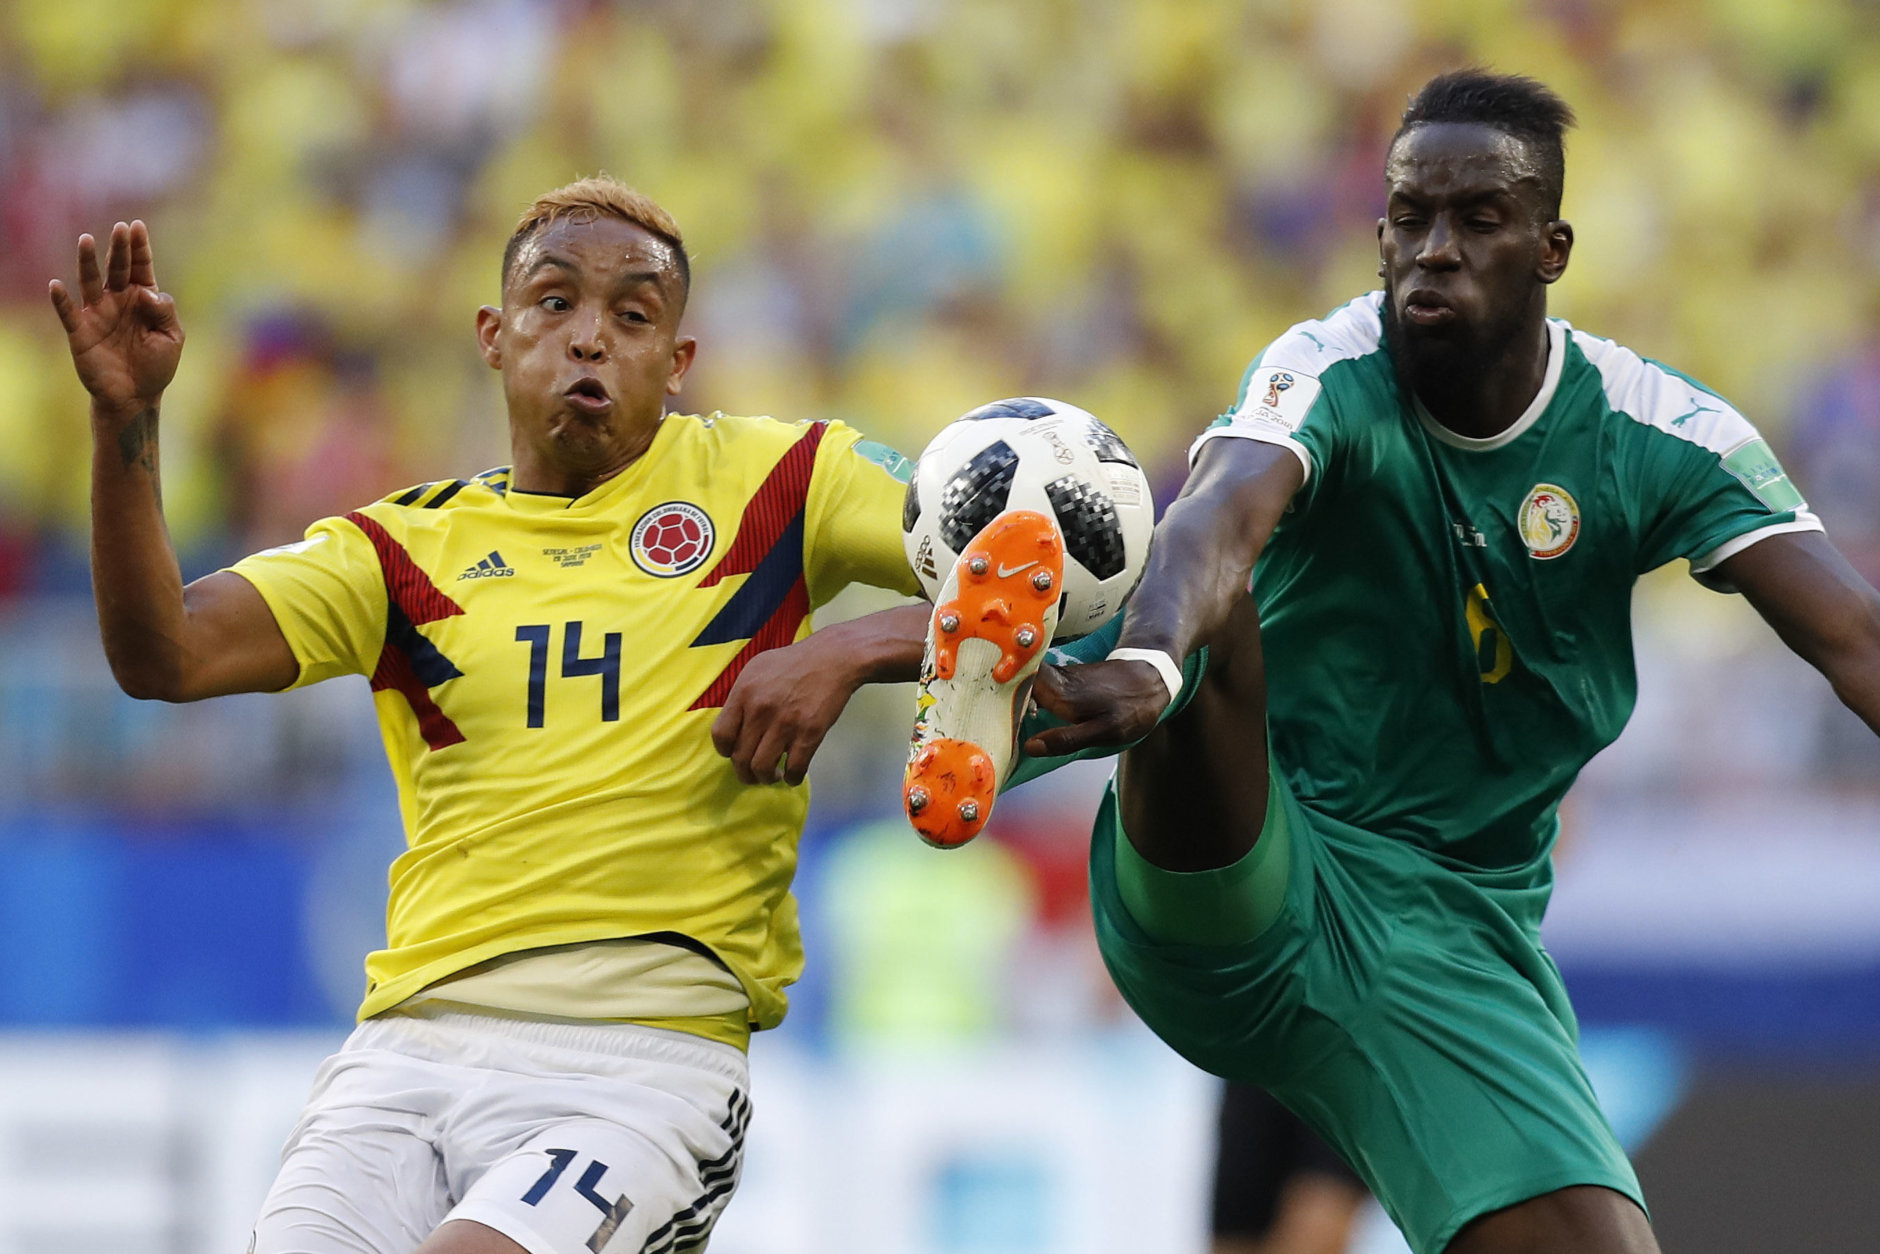 Colombia's Luis Muriel, left, and Senegal's Salif Sane challenge for the ball during the group H match between Senegal and Colombia, at the 2018 soccer World Cup in the Samara Arena in Samara, Russia, Thursday, June 28, 2018. (AP Photo/Efrem Lukatsky)